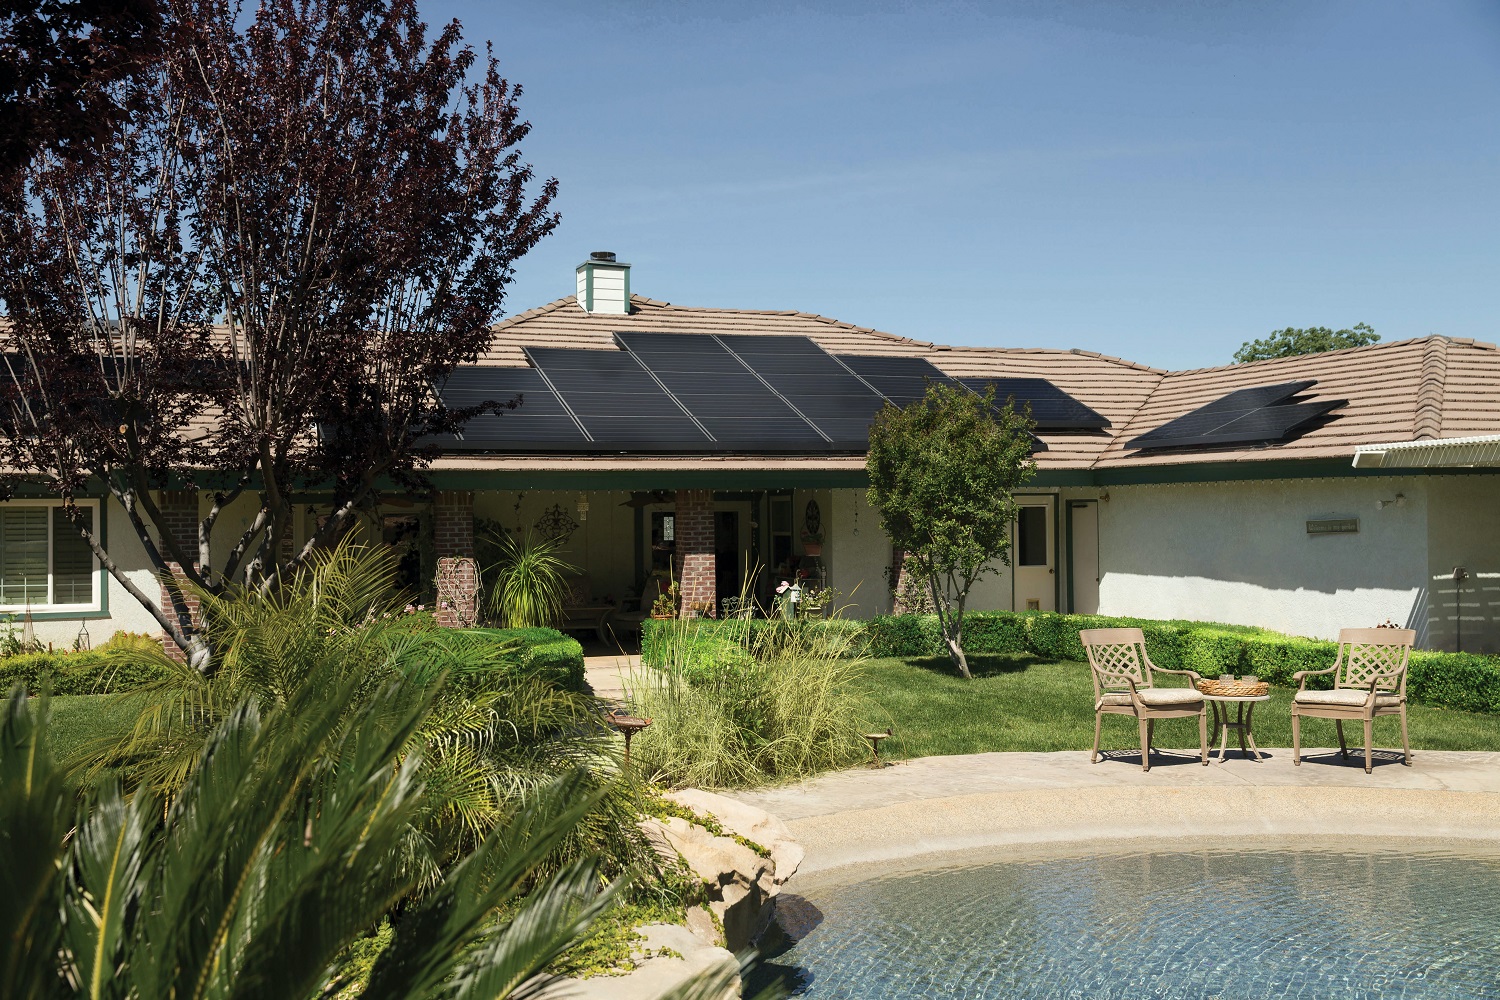 How a Solar Roof Works to Power a Home